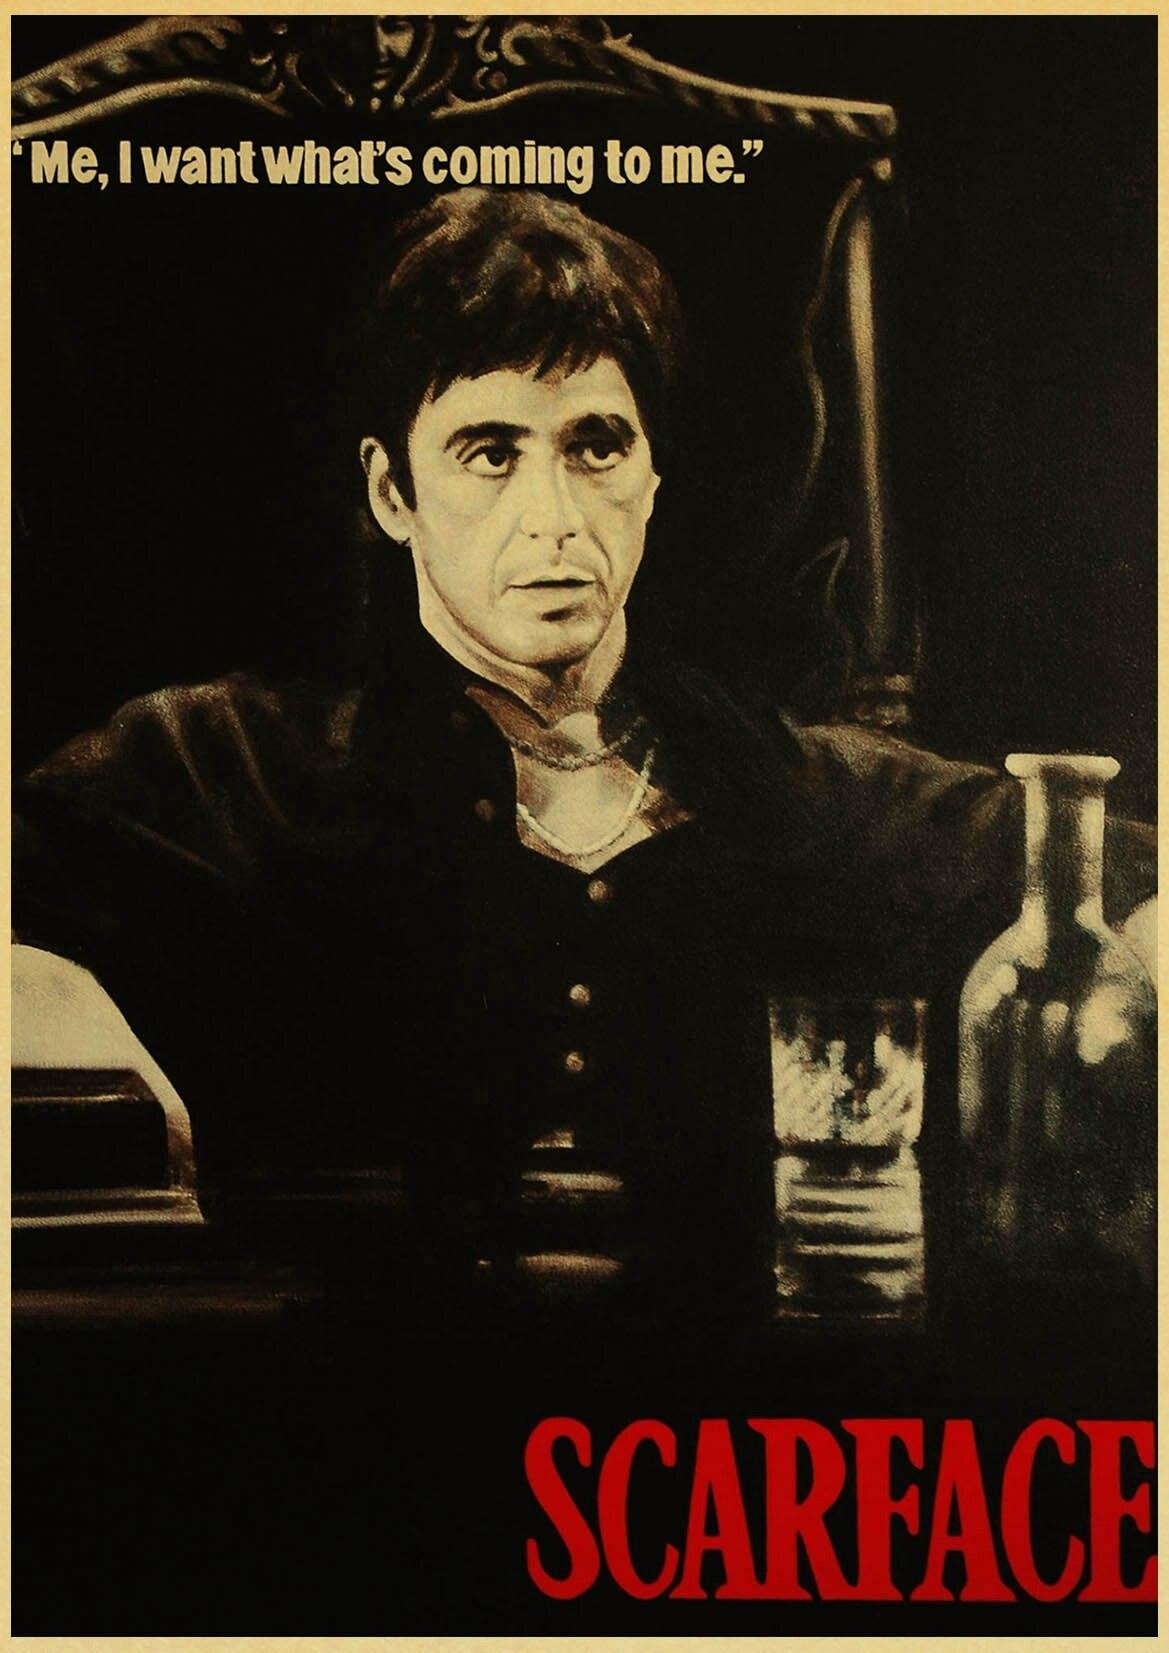 Me, I want what's coming to me- Scarface Tony Montana Movie Quote Poster - Aesthetic Wall Decor